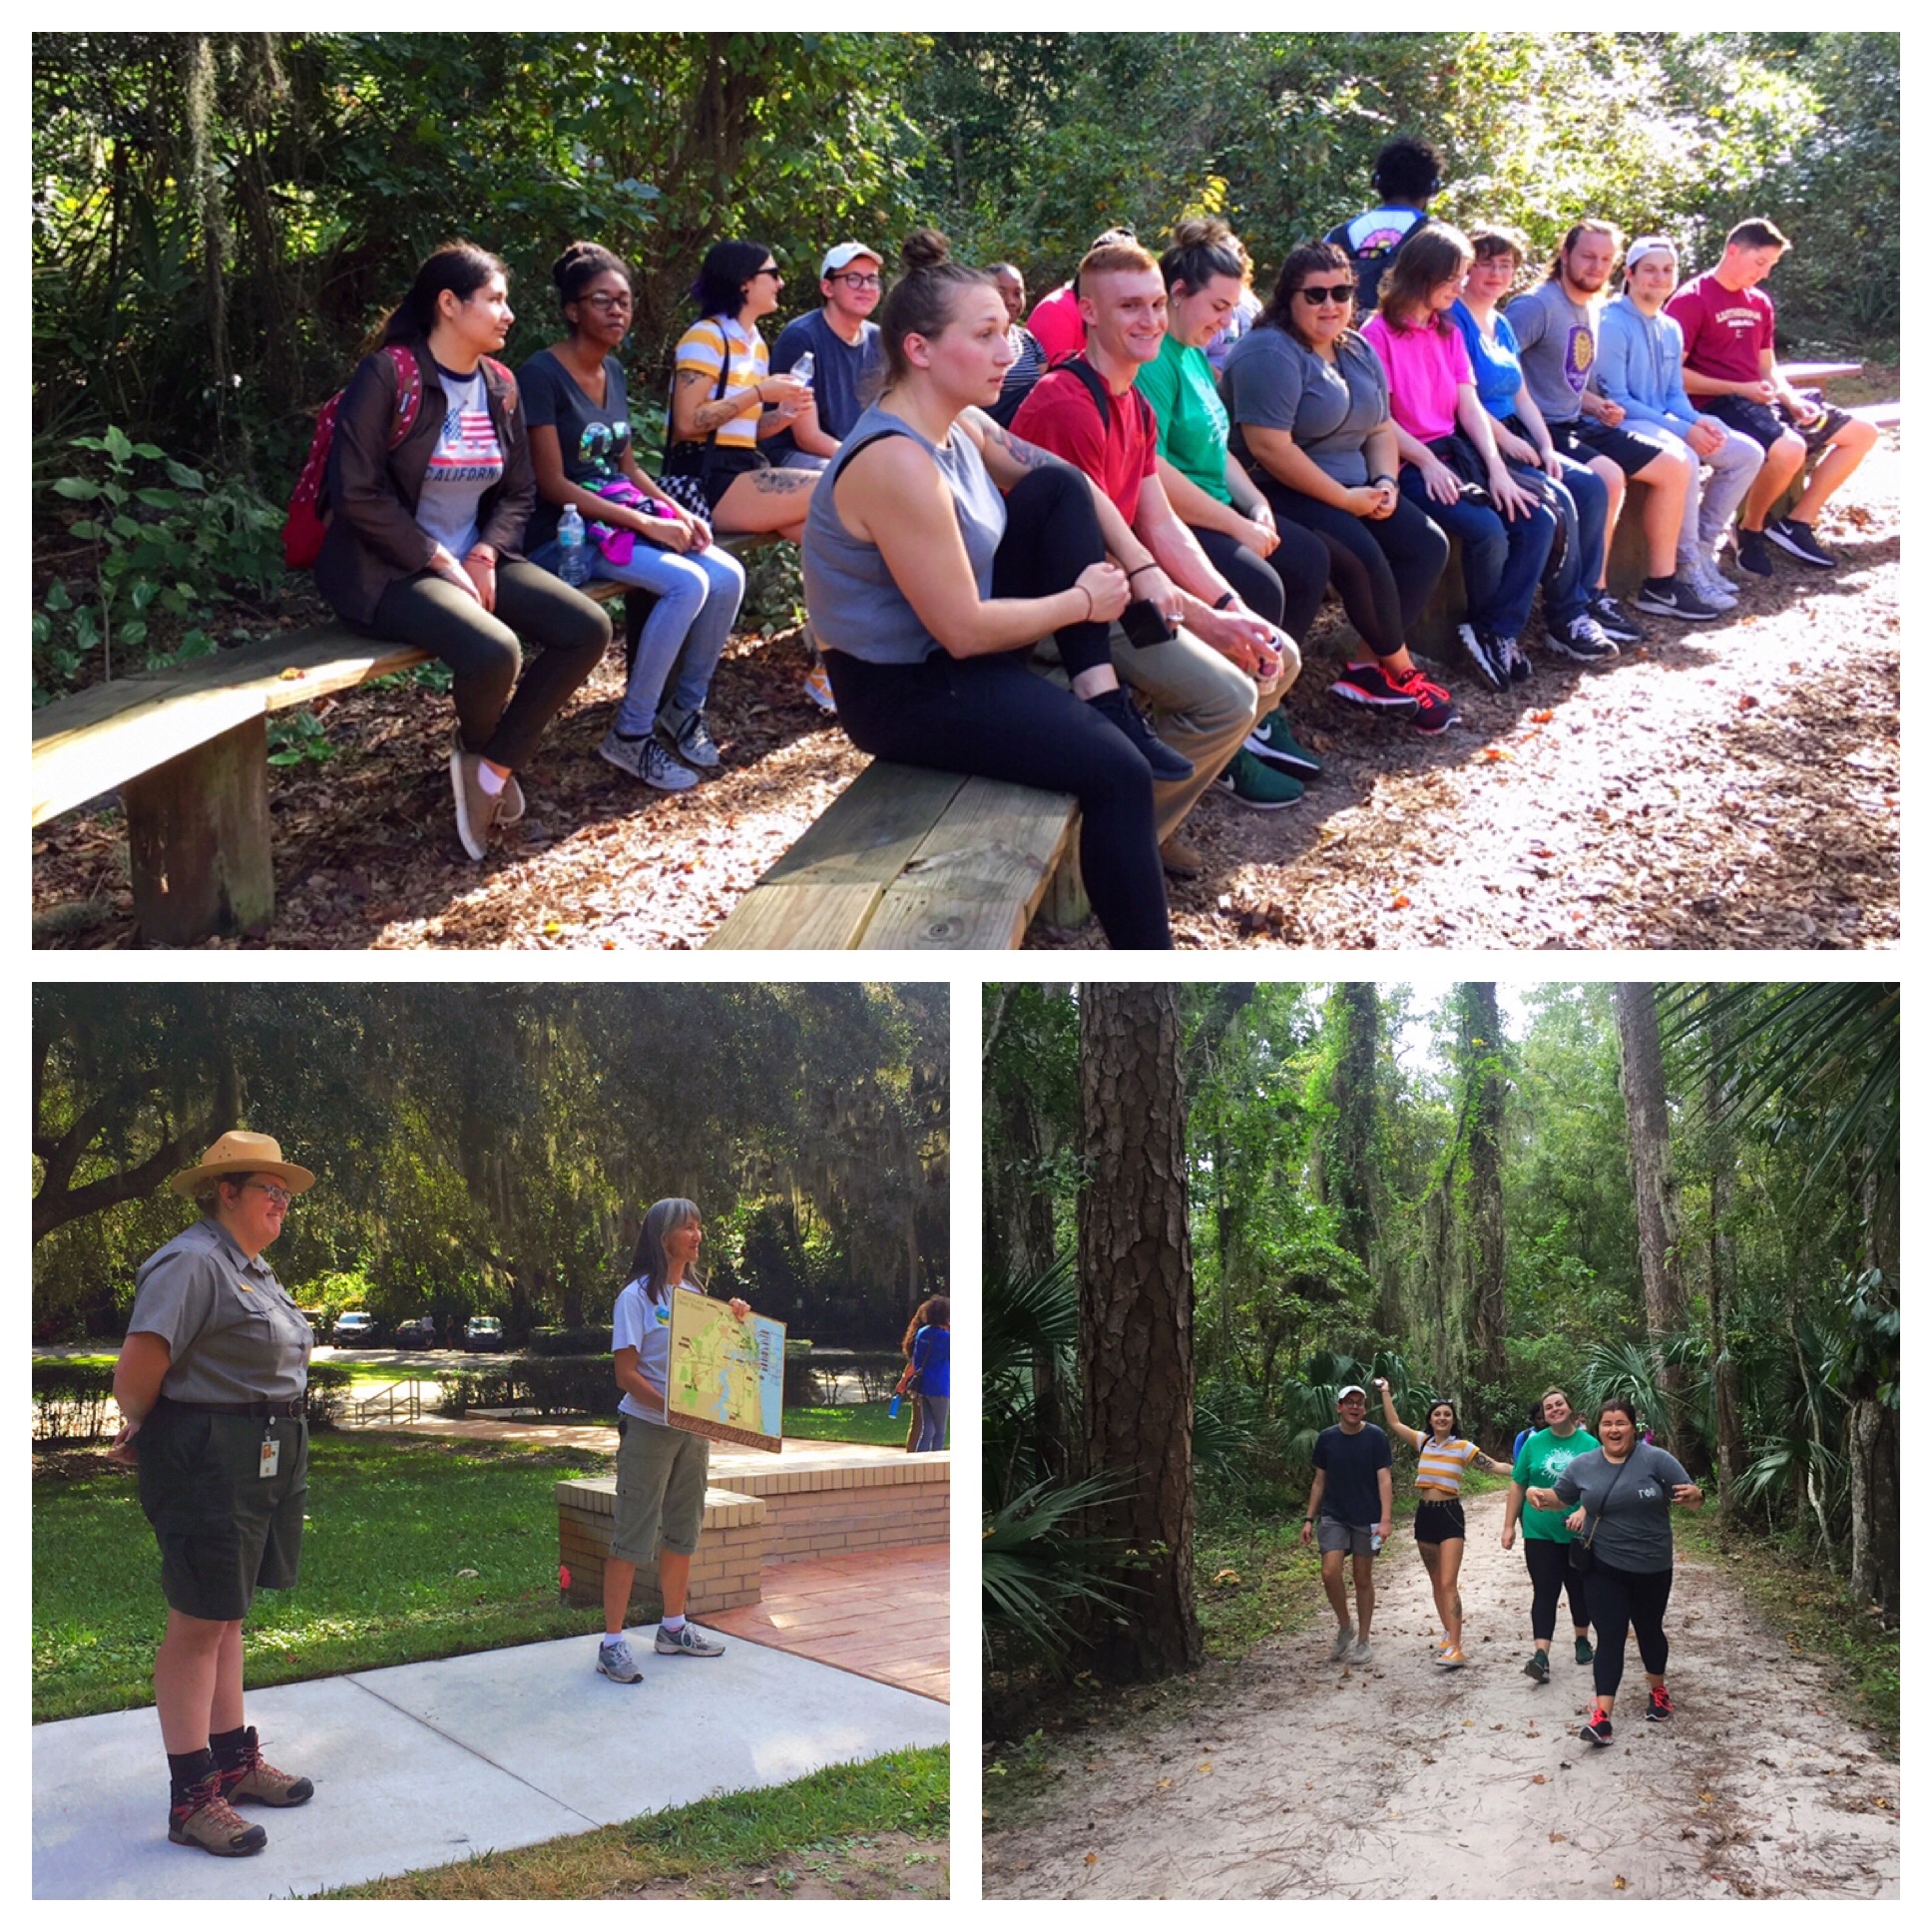 Collage of images of students’ site visit to Timucuan Ecological and Historic Preserve.